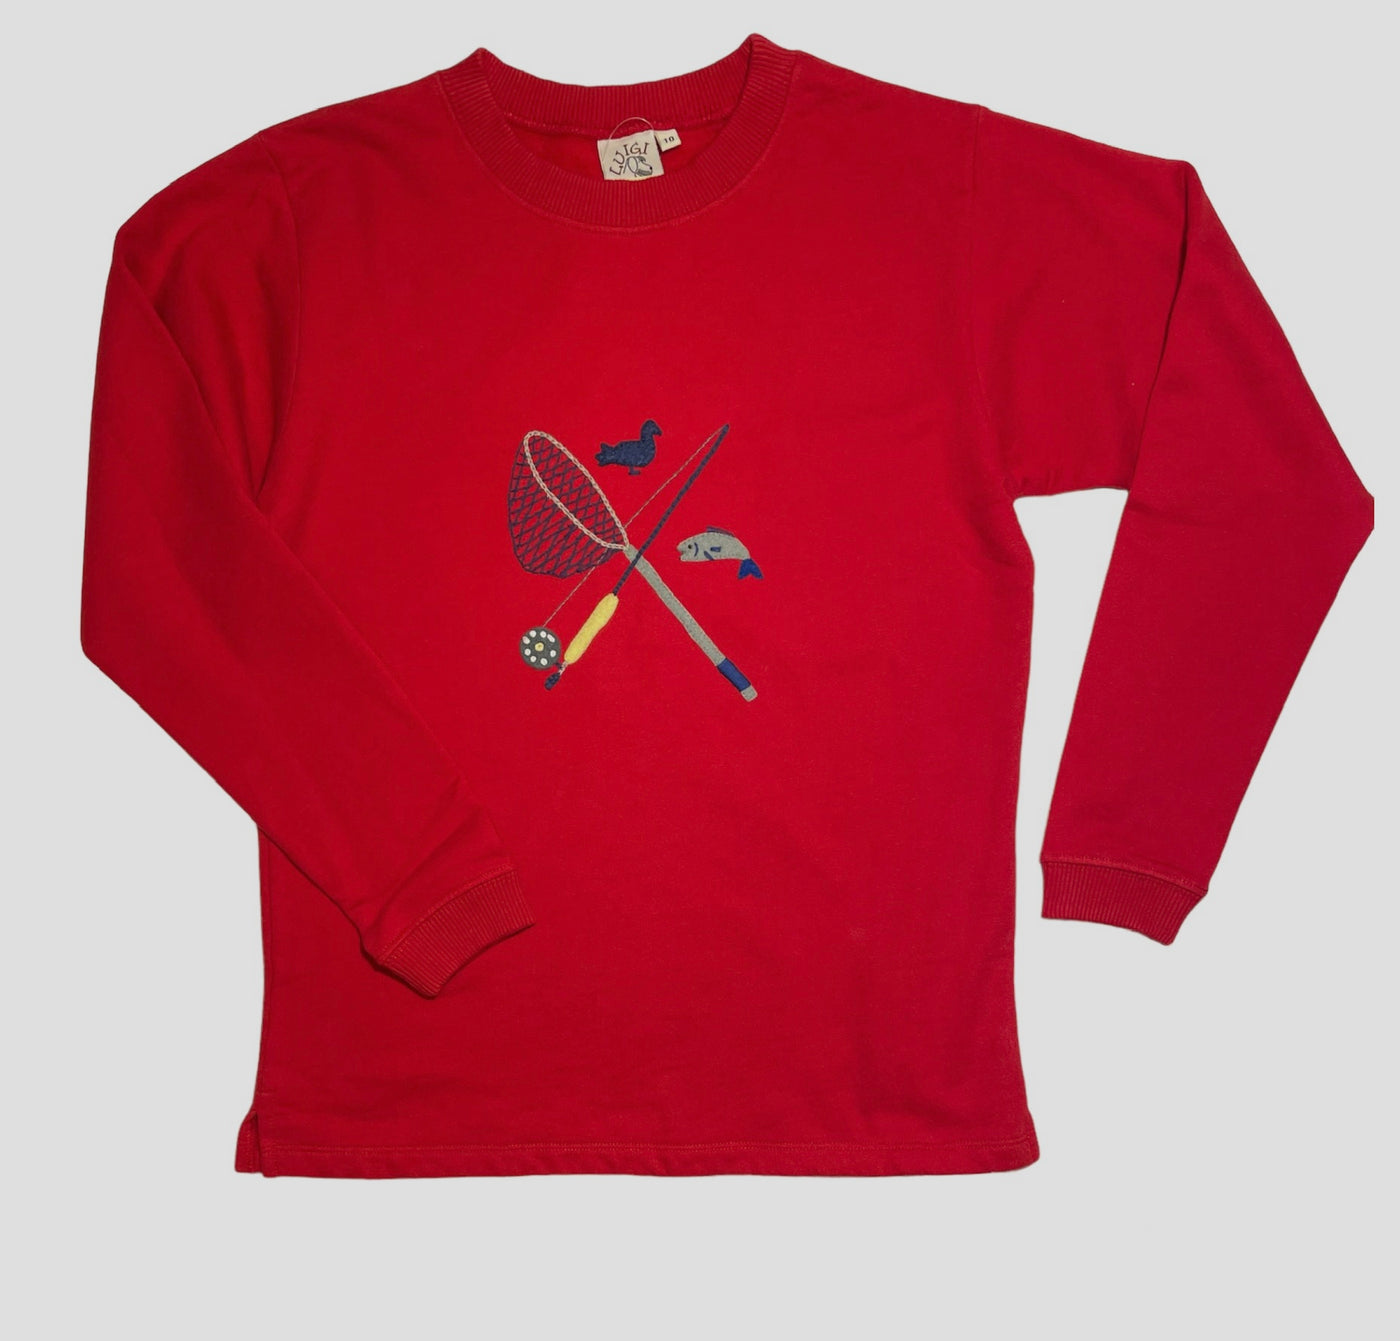 Red Sweatshirt with Fish Net & Fly Rod